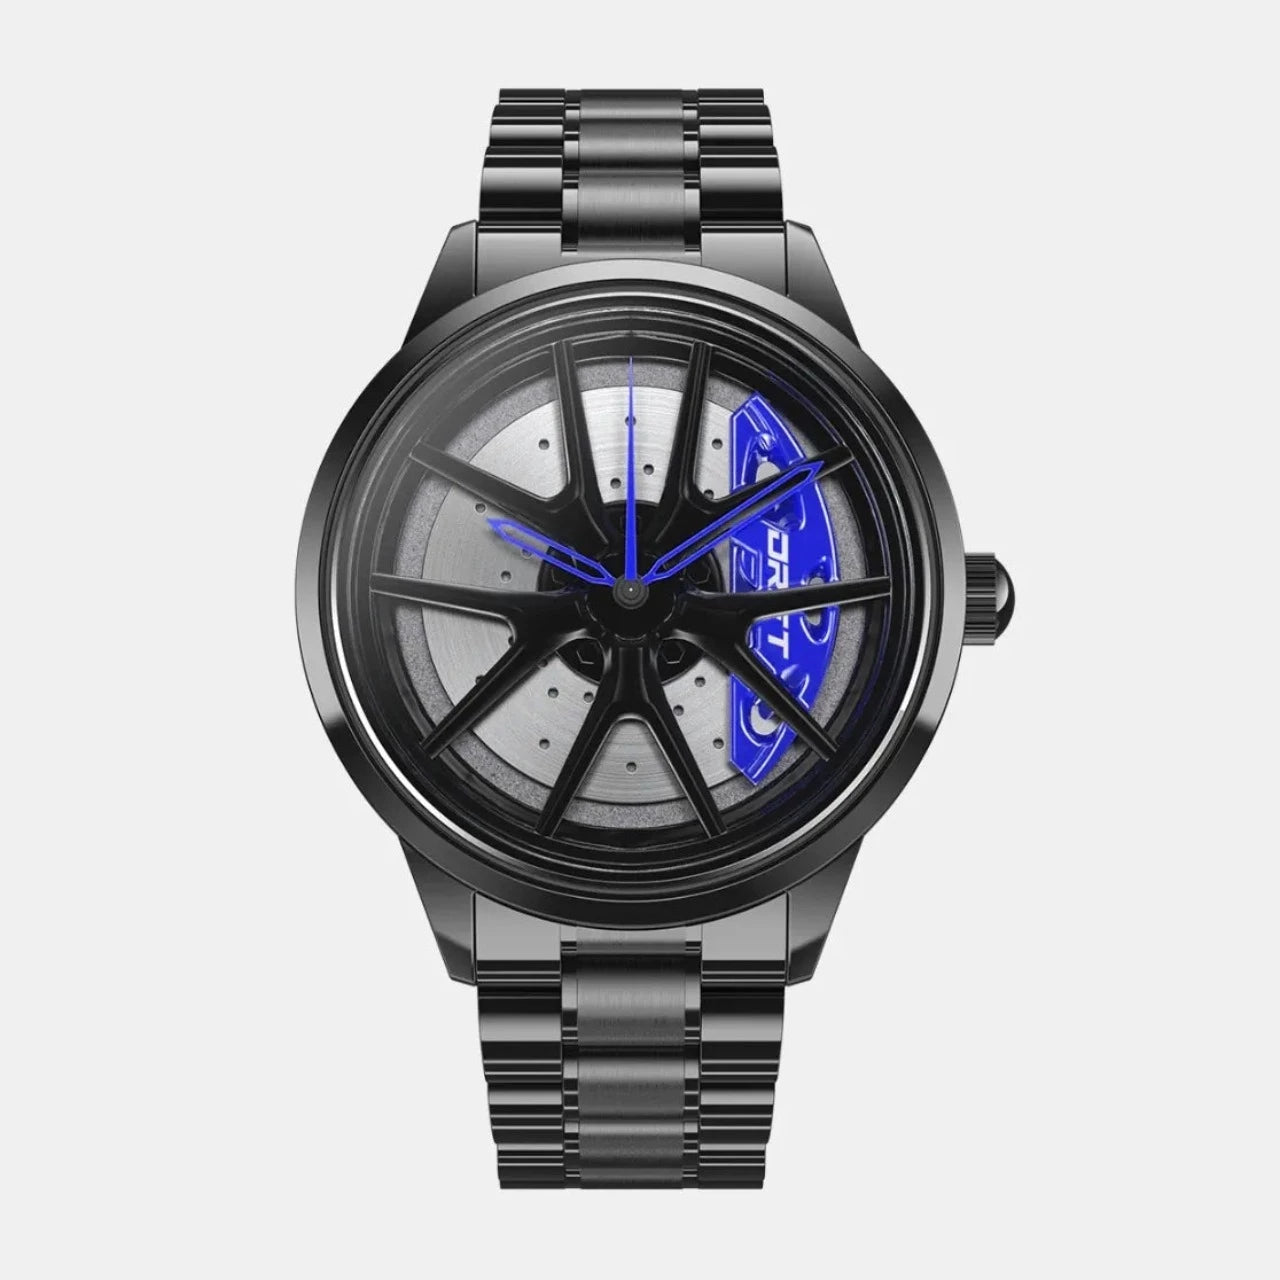 Illuminate your look with our vivid blue Nitro Rim Watch! Engineered by a German startup, these precision timepieces are designed to captivate motorsport, tuning, and auto aficionados. Prepare to ignite your enthusiasm! #id_46744364286282